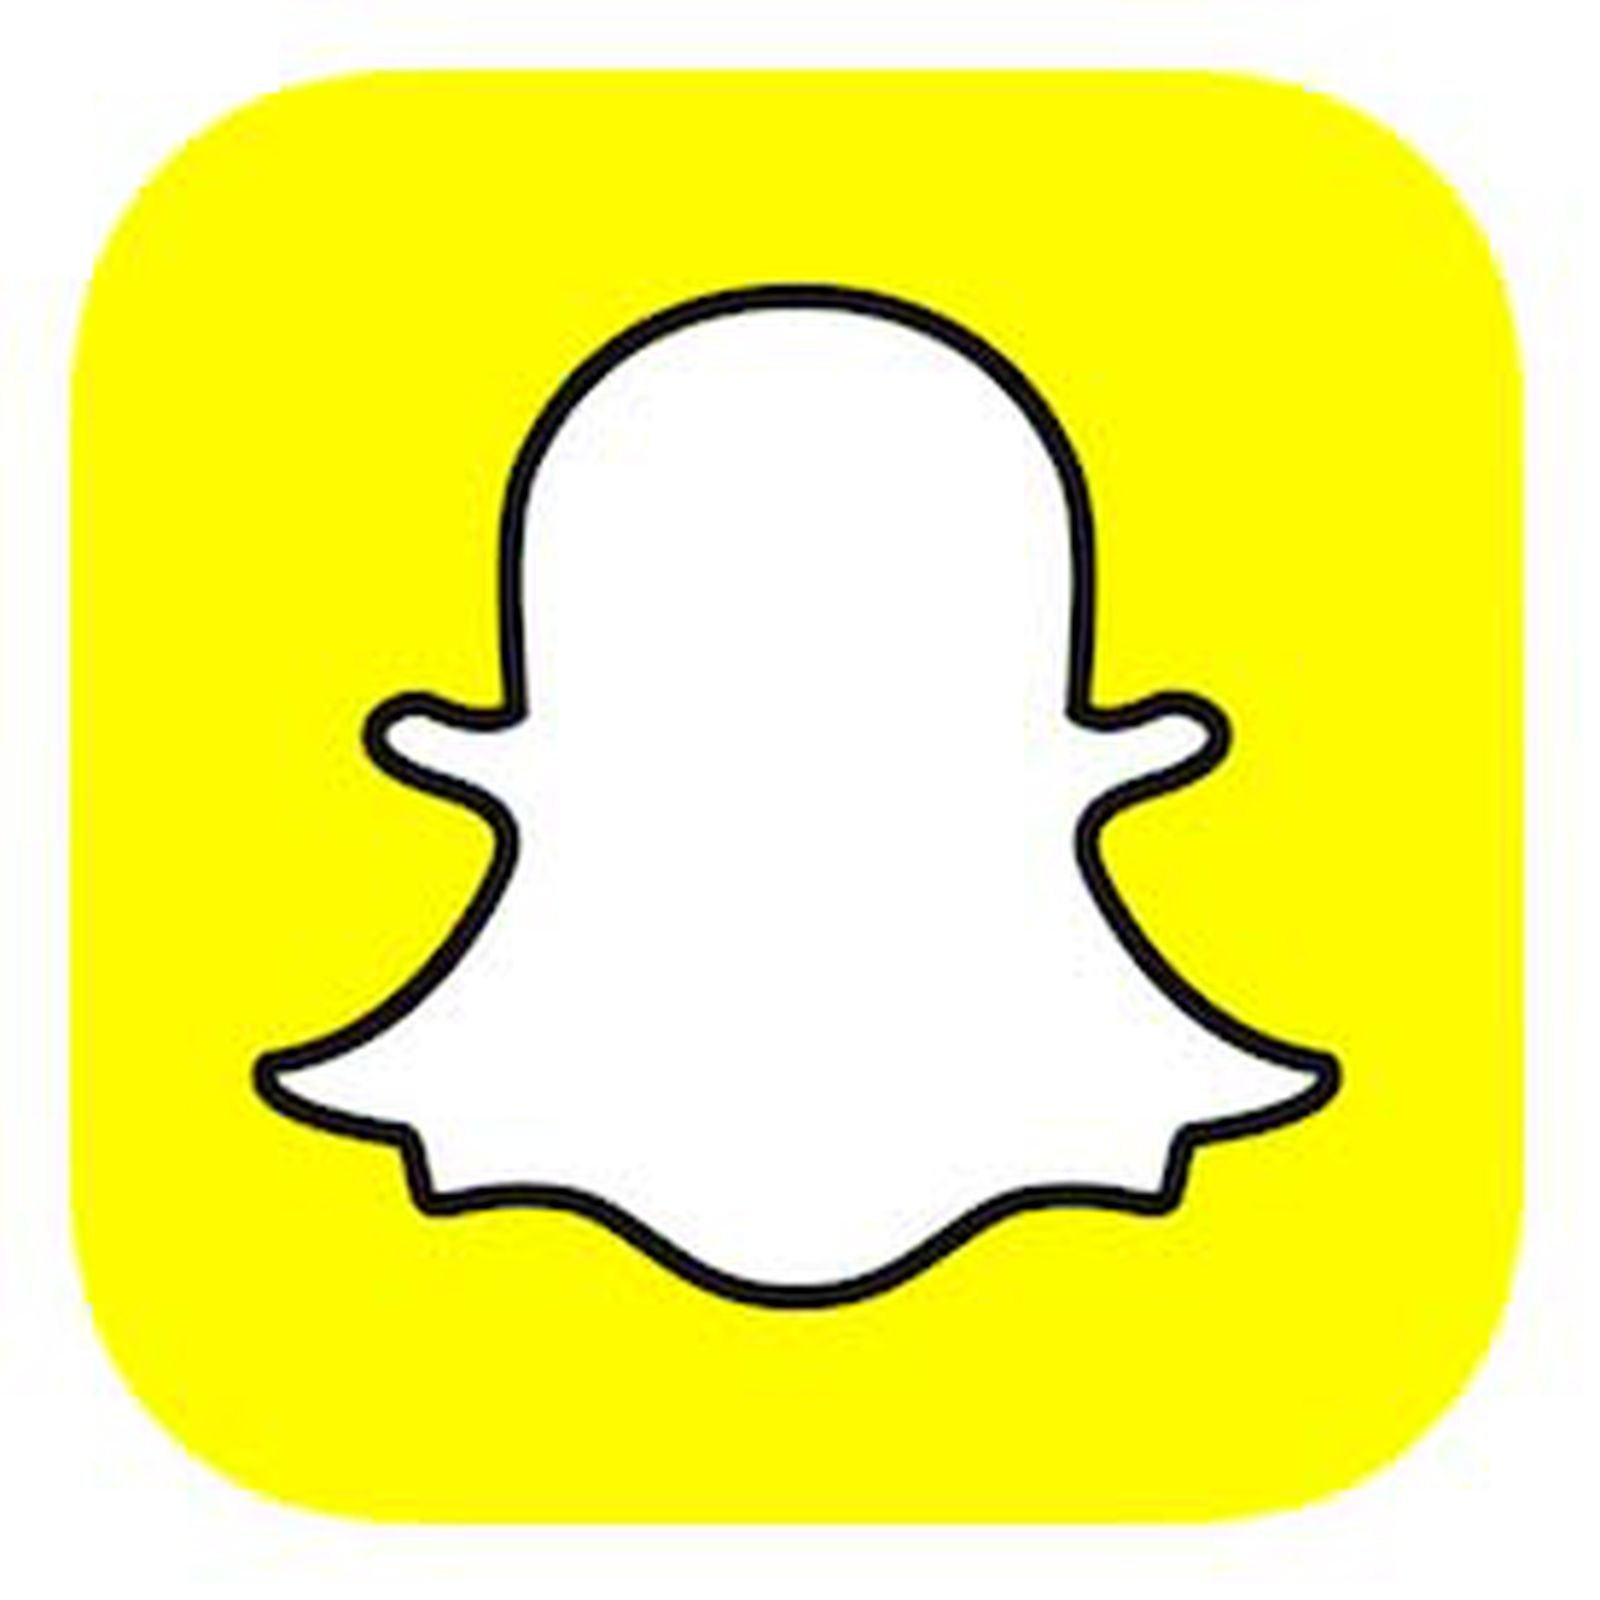 Snapchat Planning to Launch 'Internal App Store' for Games This Fall - MacRumors